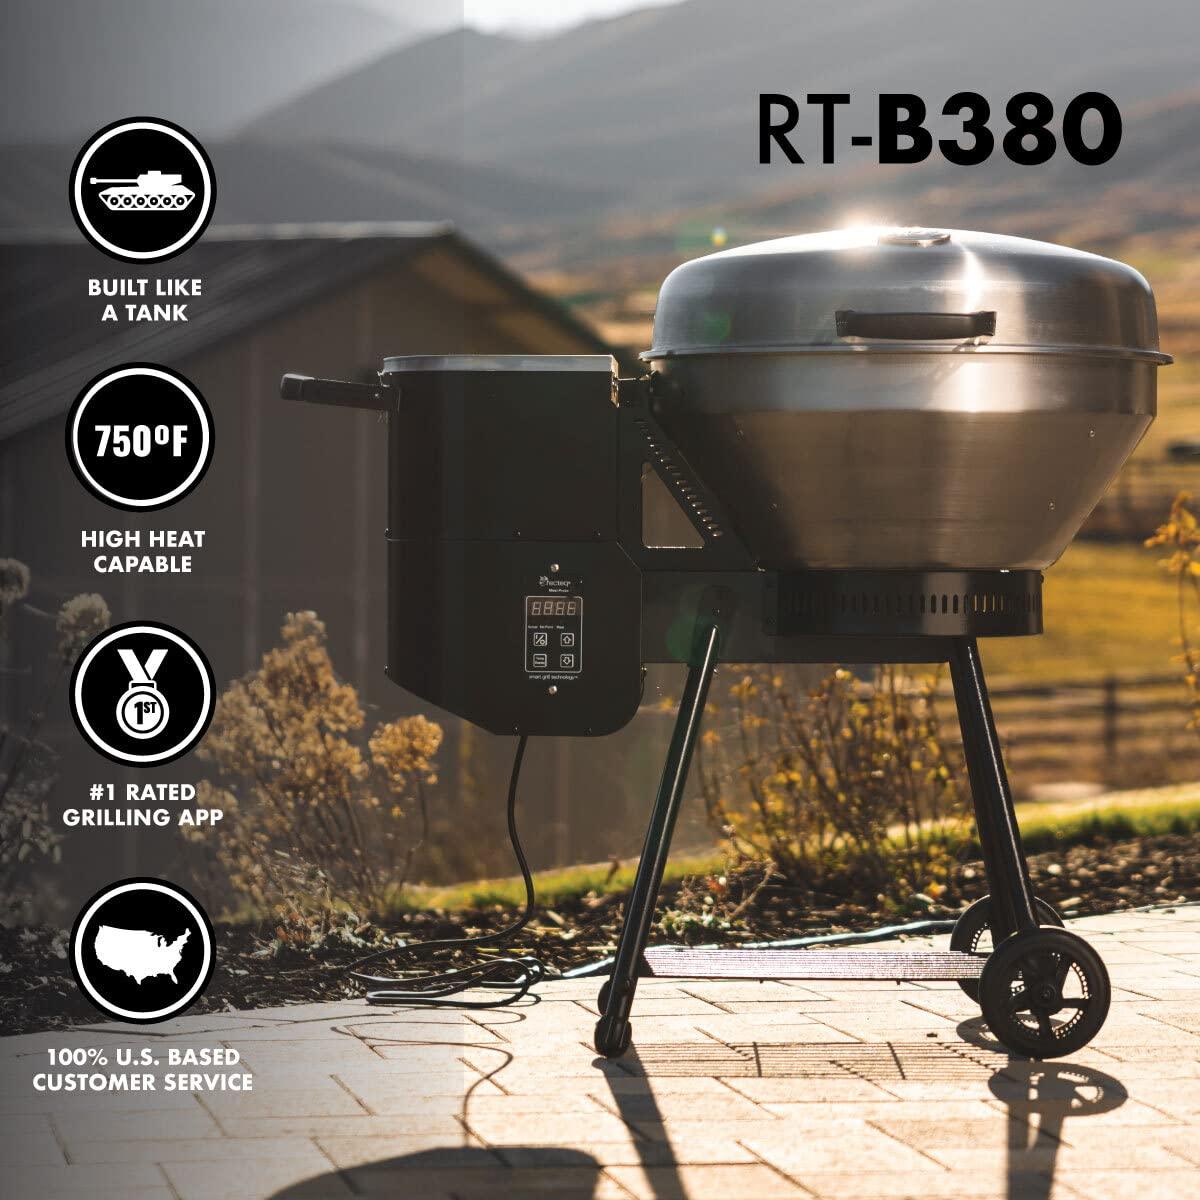 recteq RT-B380 Bullseye Wood Pellet Grill - Electric Pellet Smoker Grill, BBQ Grill, Outdoor Grill - Uses 100% Wood Pellets - Ribs, Brisket, Chicken, Pork Chops - Grill, Sear, Smoke, and More! - CookCave